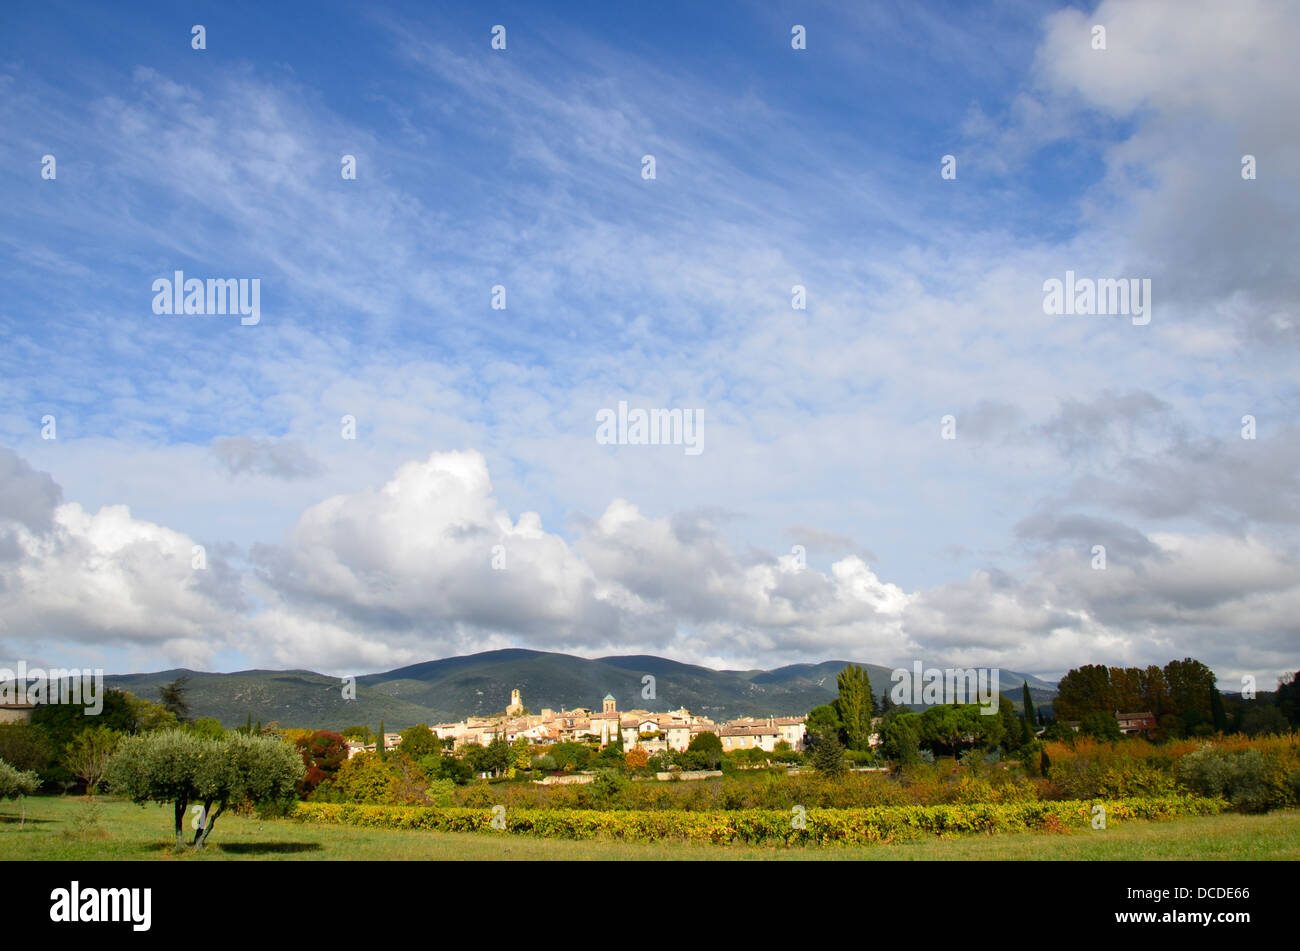 Lourmarin village in the Luberon, situated at the foot of the Luberon, a mountain range of light and contrasts. Provence, France Stock Photo